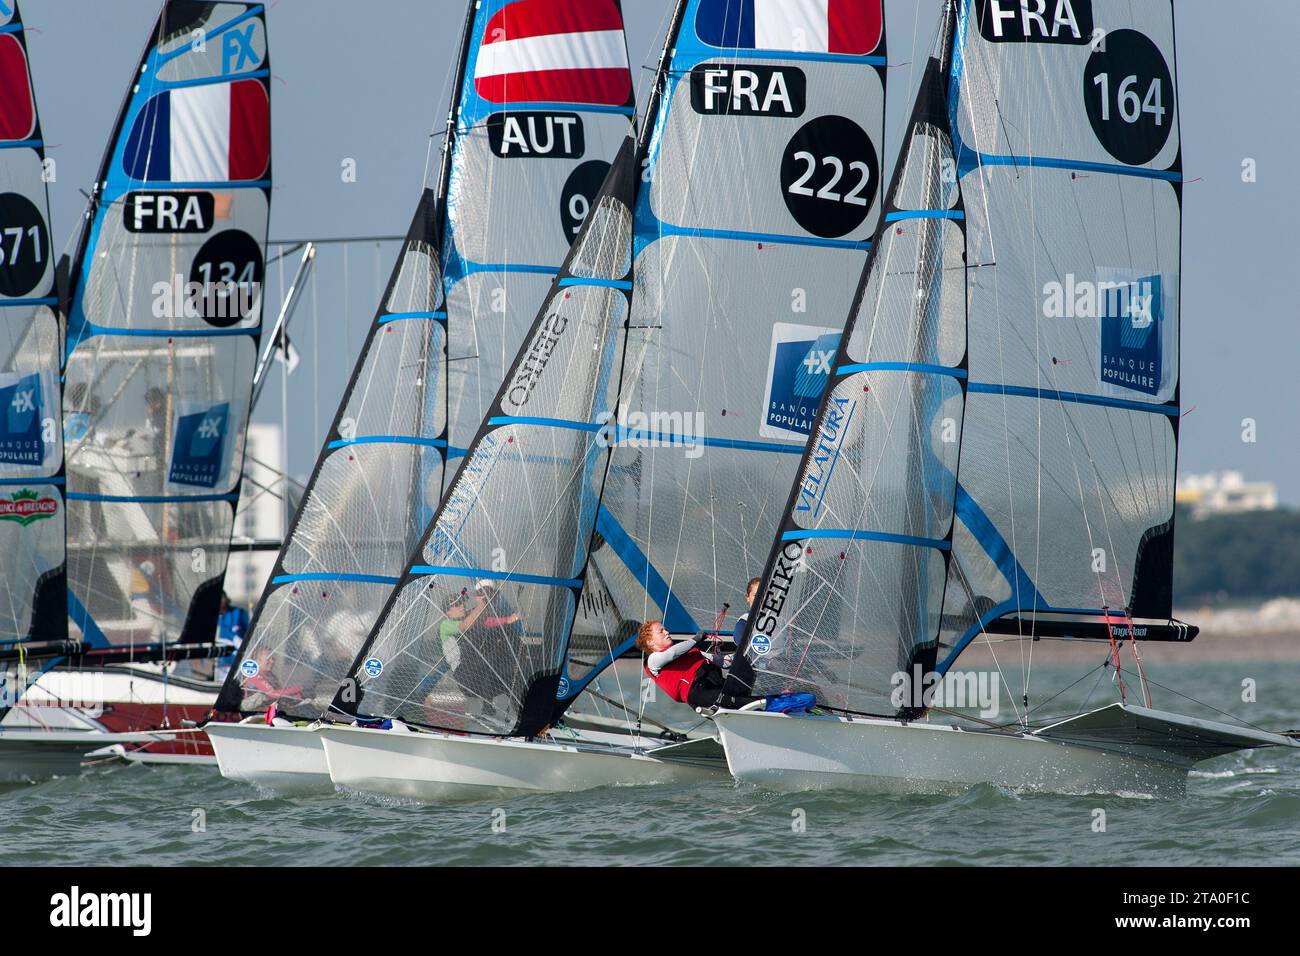 Marion LEPRUNIER and Alizée GADEL (FRA 164), 49er FX Serie, in sailing action during the SOF (Semaine Olympique Francaise) in La Rochelle on October 9, 2013 - Photo Olivier Blanchet / DPPI - Stock Photo